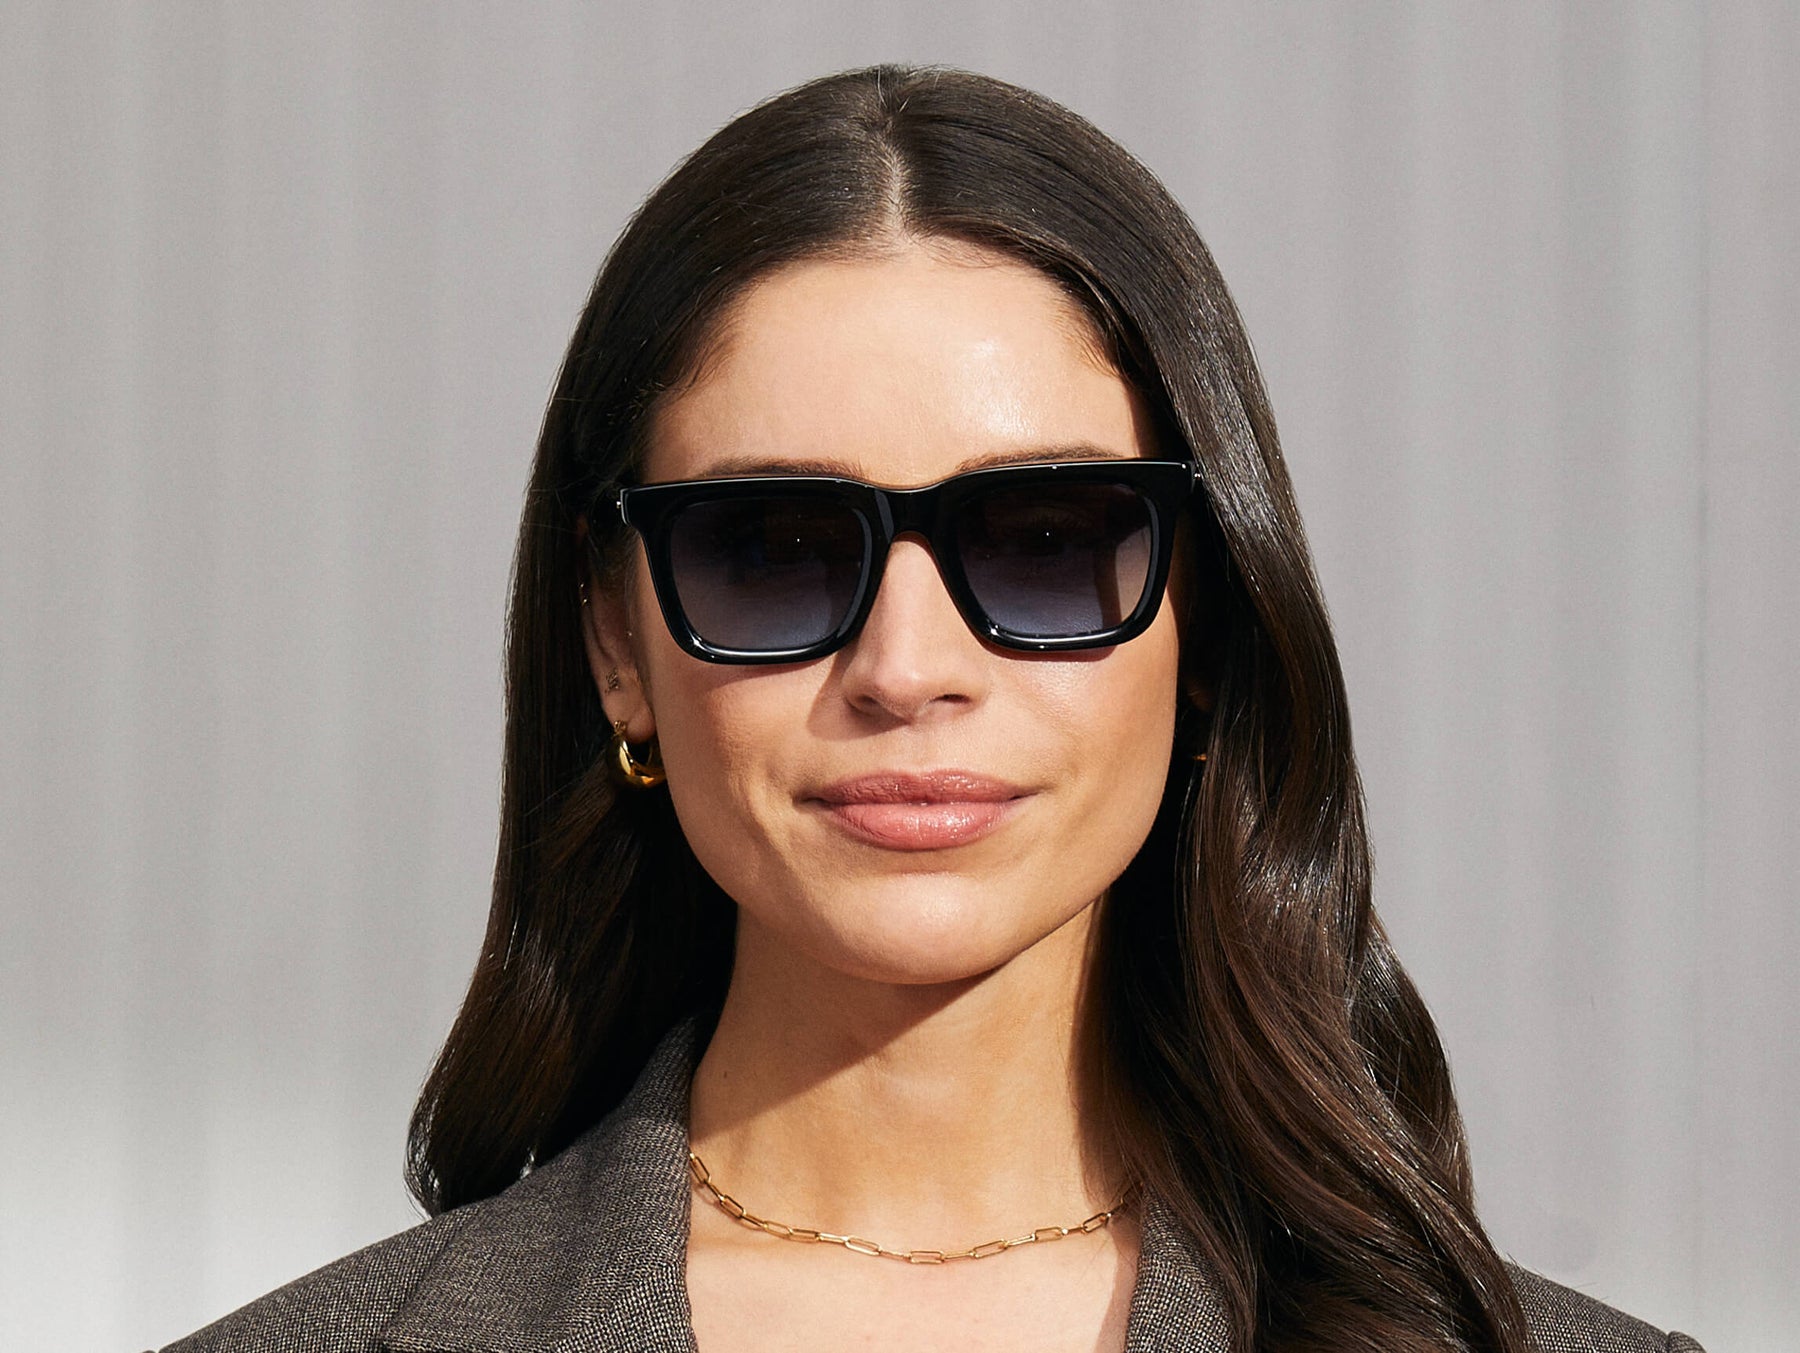 Model is wearing The RIZIK in Black in size 49 with Denim Blue Tinted Lenses